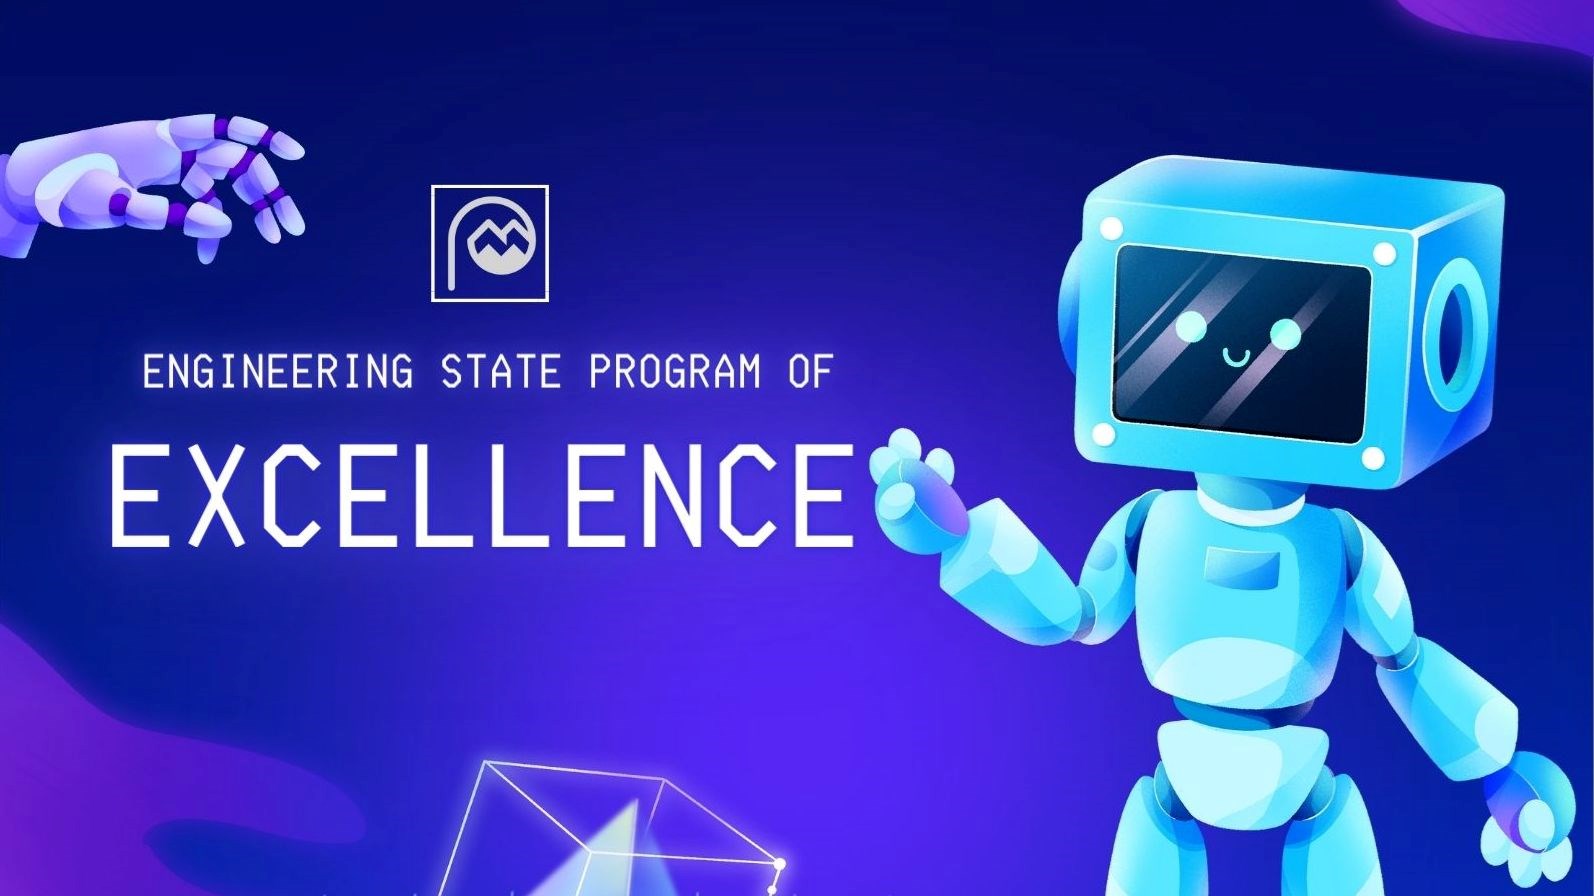 Engineering State Program of Excellence Cartoon Robot Image